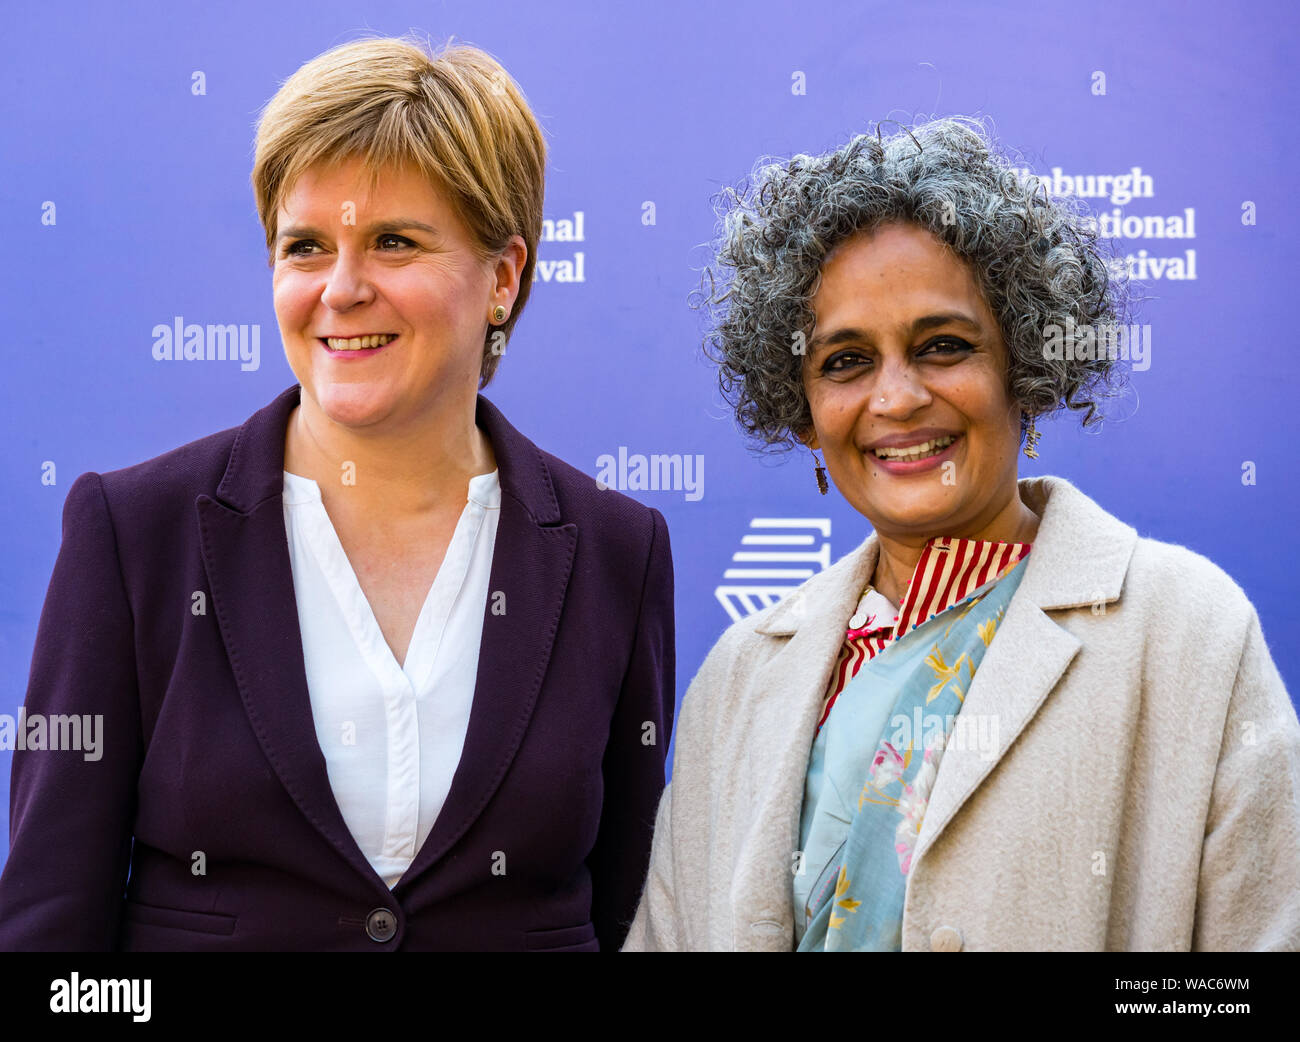 Edinburgh, Scotland, UK, 19th August 2019. Edinburgh International Book Festival. Pictured: Nicola Sturgeon, First Minister, hosts a discussion with Indian author Arundhati Roy at the book festival. Arindhati Roy is an Indian author and political activist involved in human rights and environmental causes Stock Photo